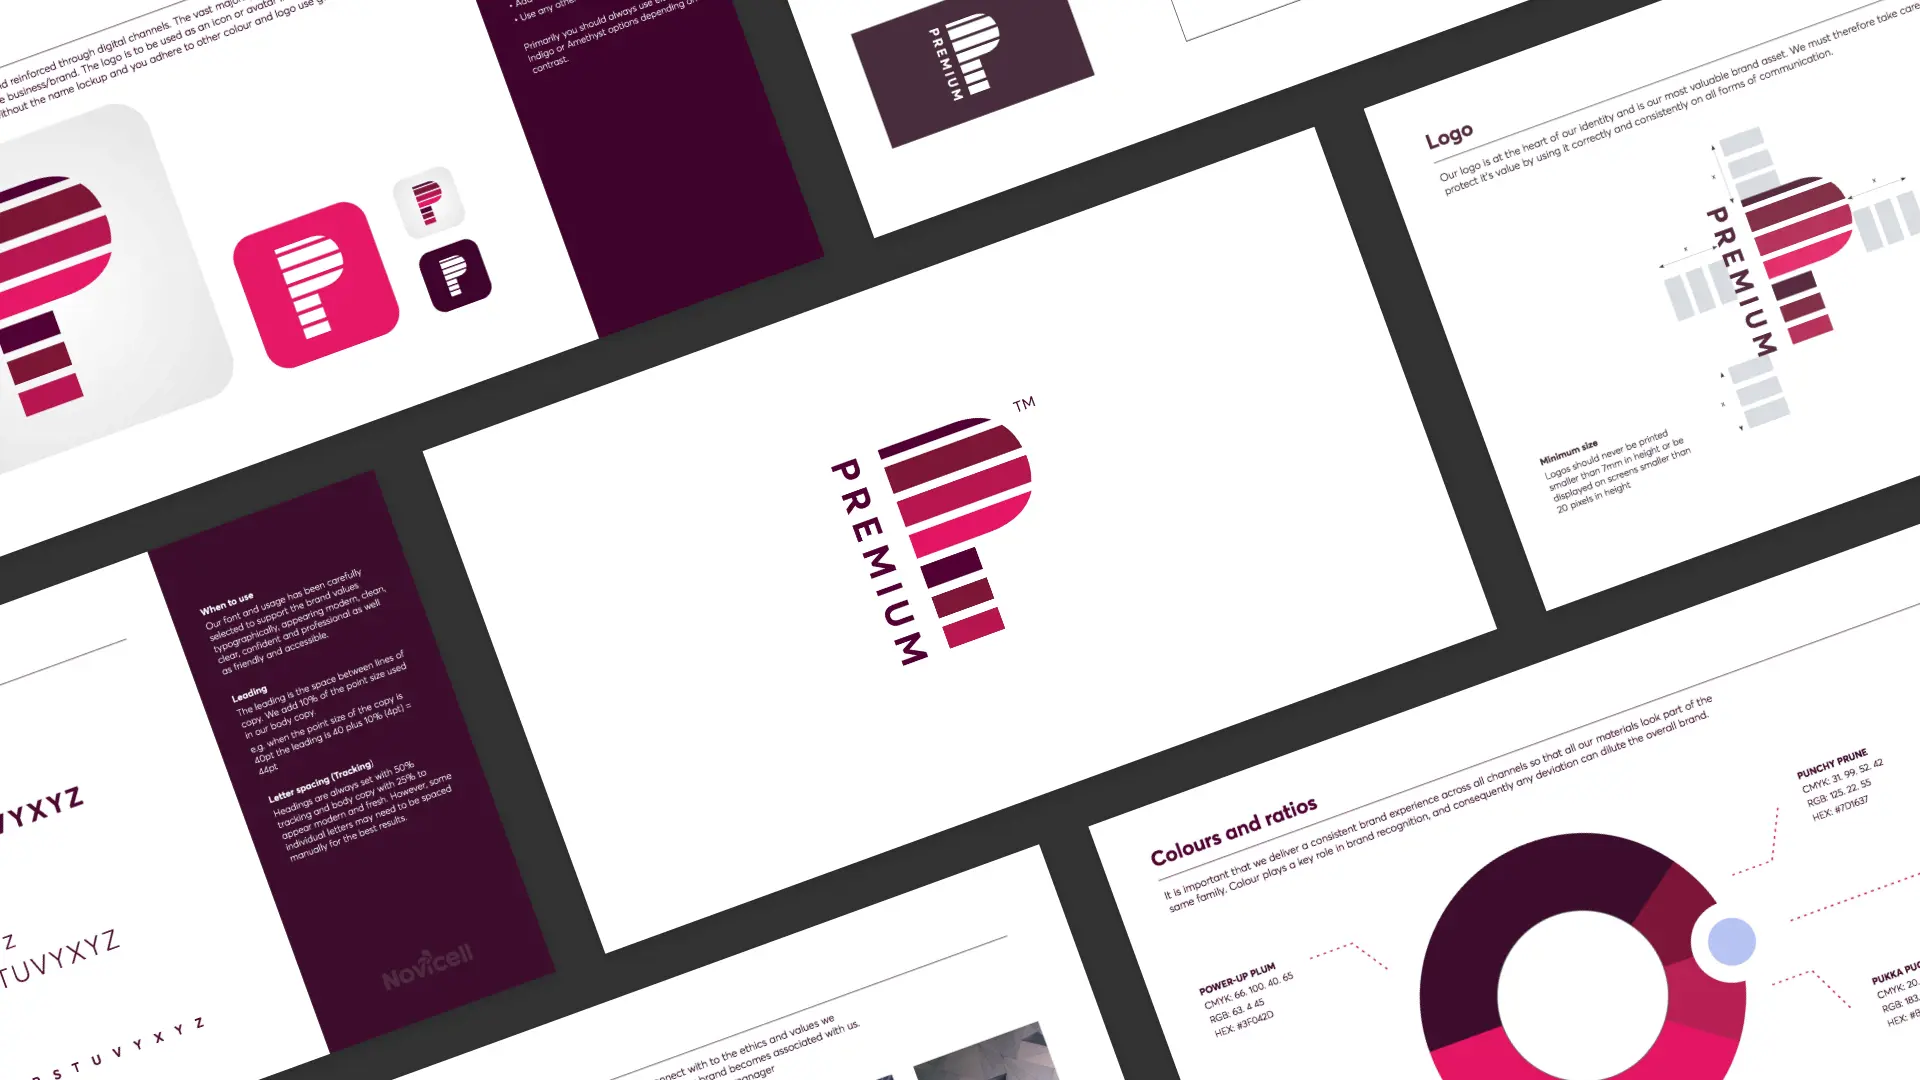 Branding elements for Premium company including logo variations, colour palette, and typography guidelines